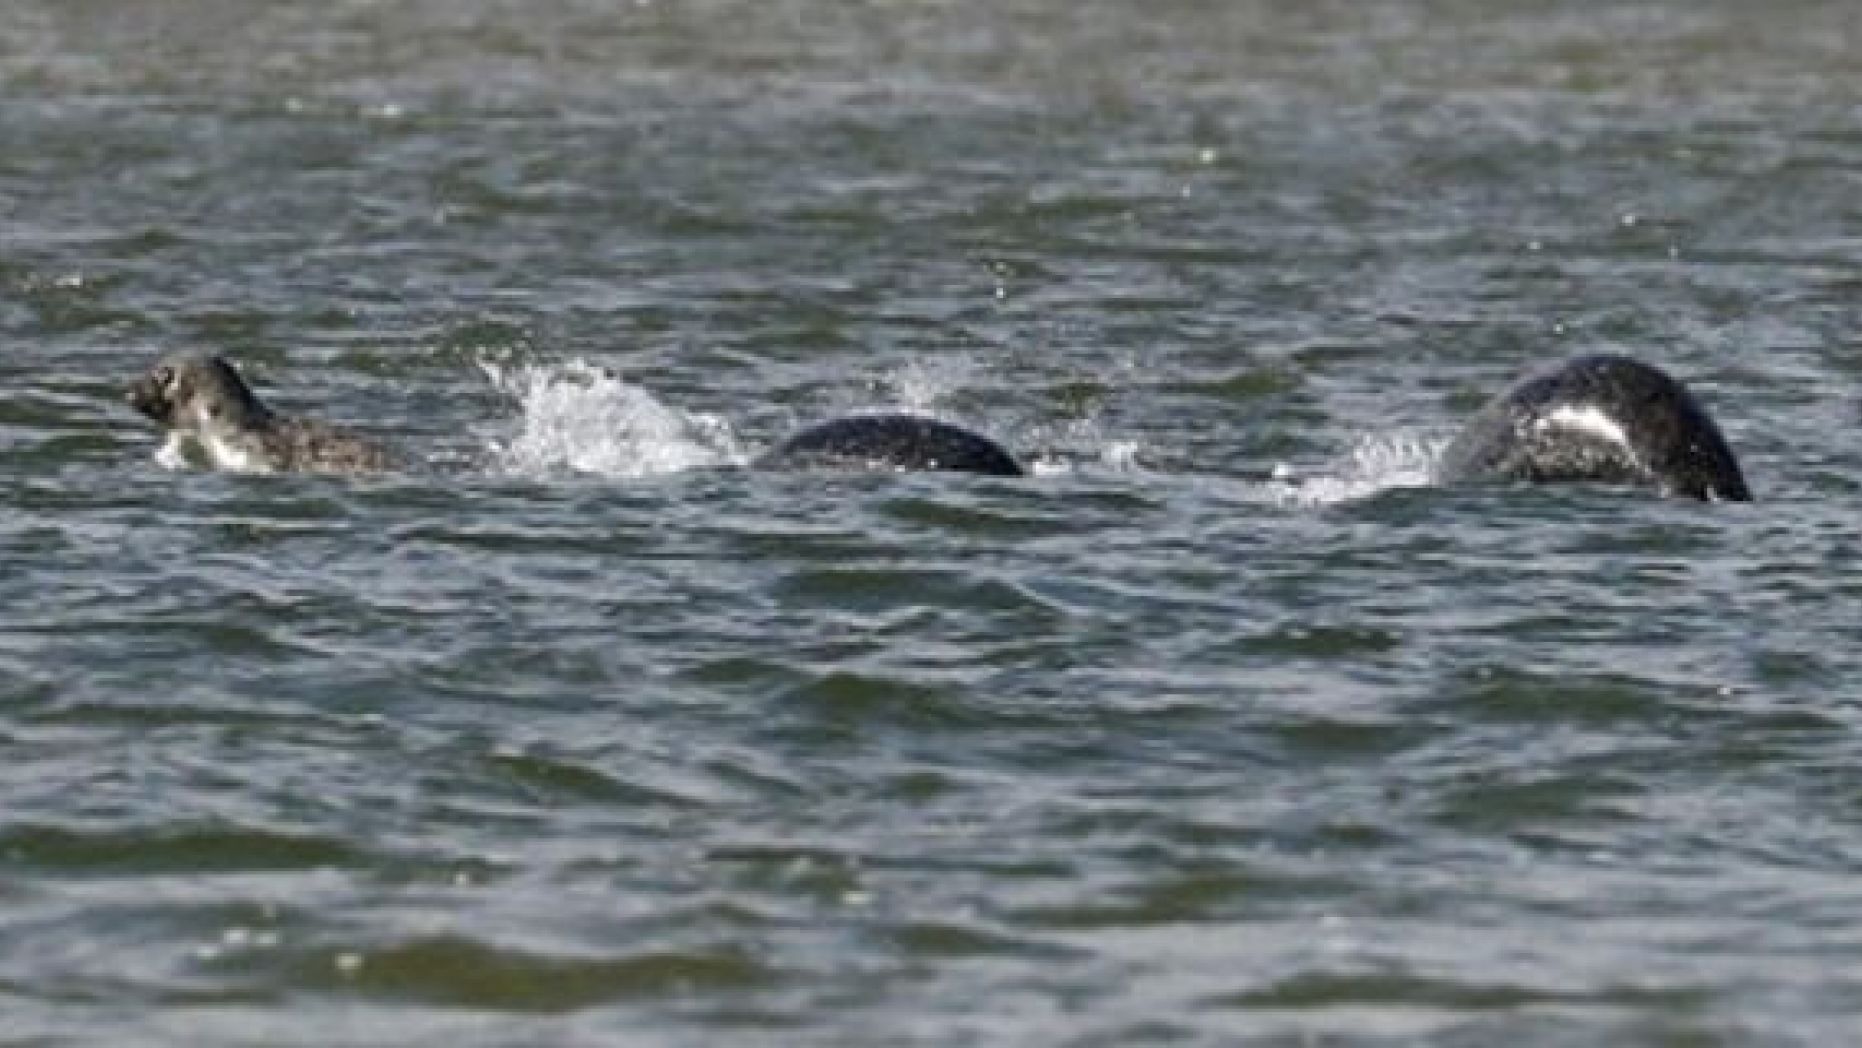 Does this picture show the Loch Ness Monster?